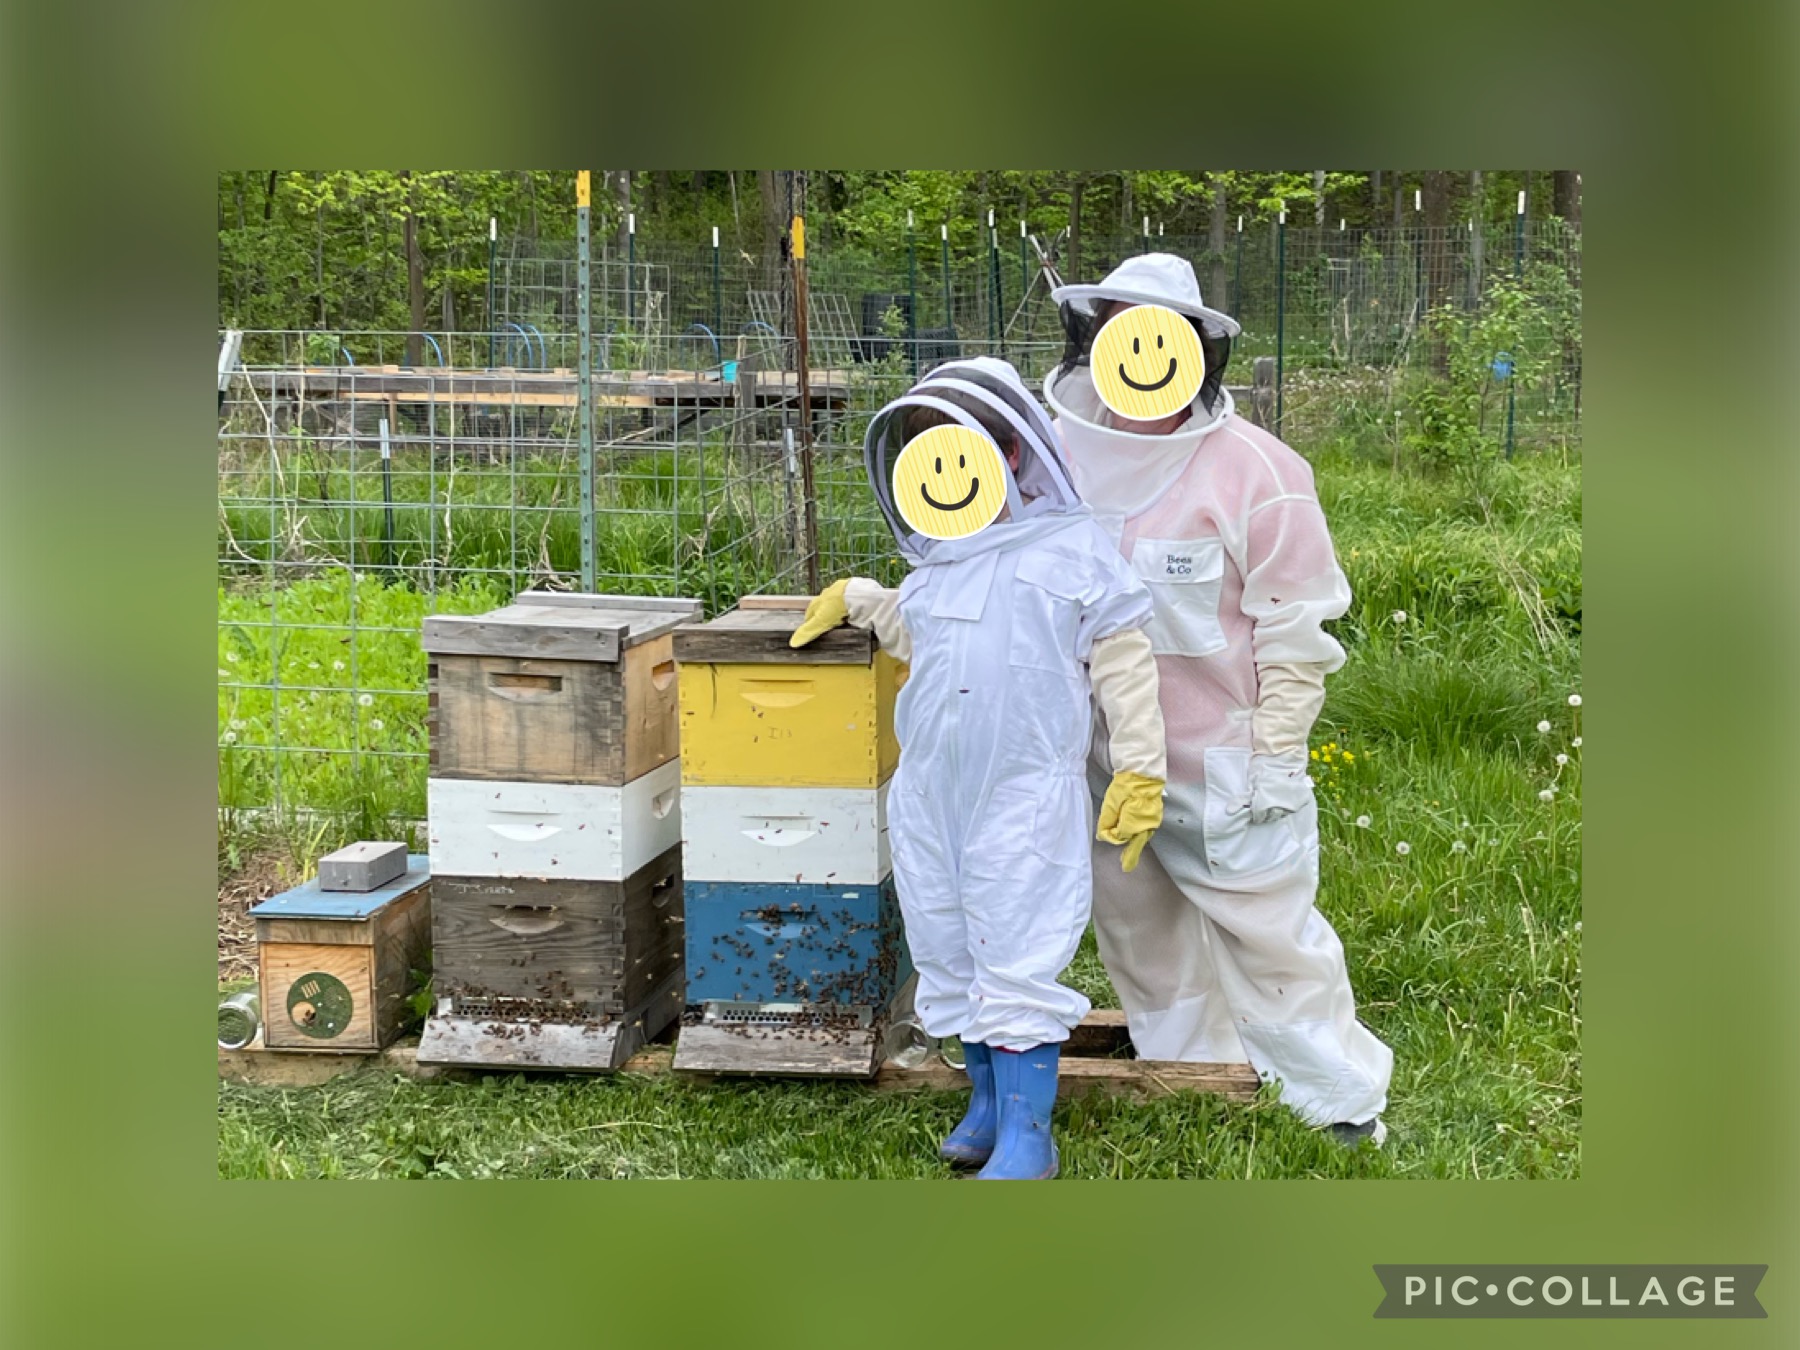 Image shows a mom and her son in bee suits standing next to three honeybee hives.  Smiley face stickers cover their faces to protect their privacy. You can't see the smiles on their faces but their stance shows they are comfortable being close to the hives